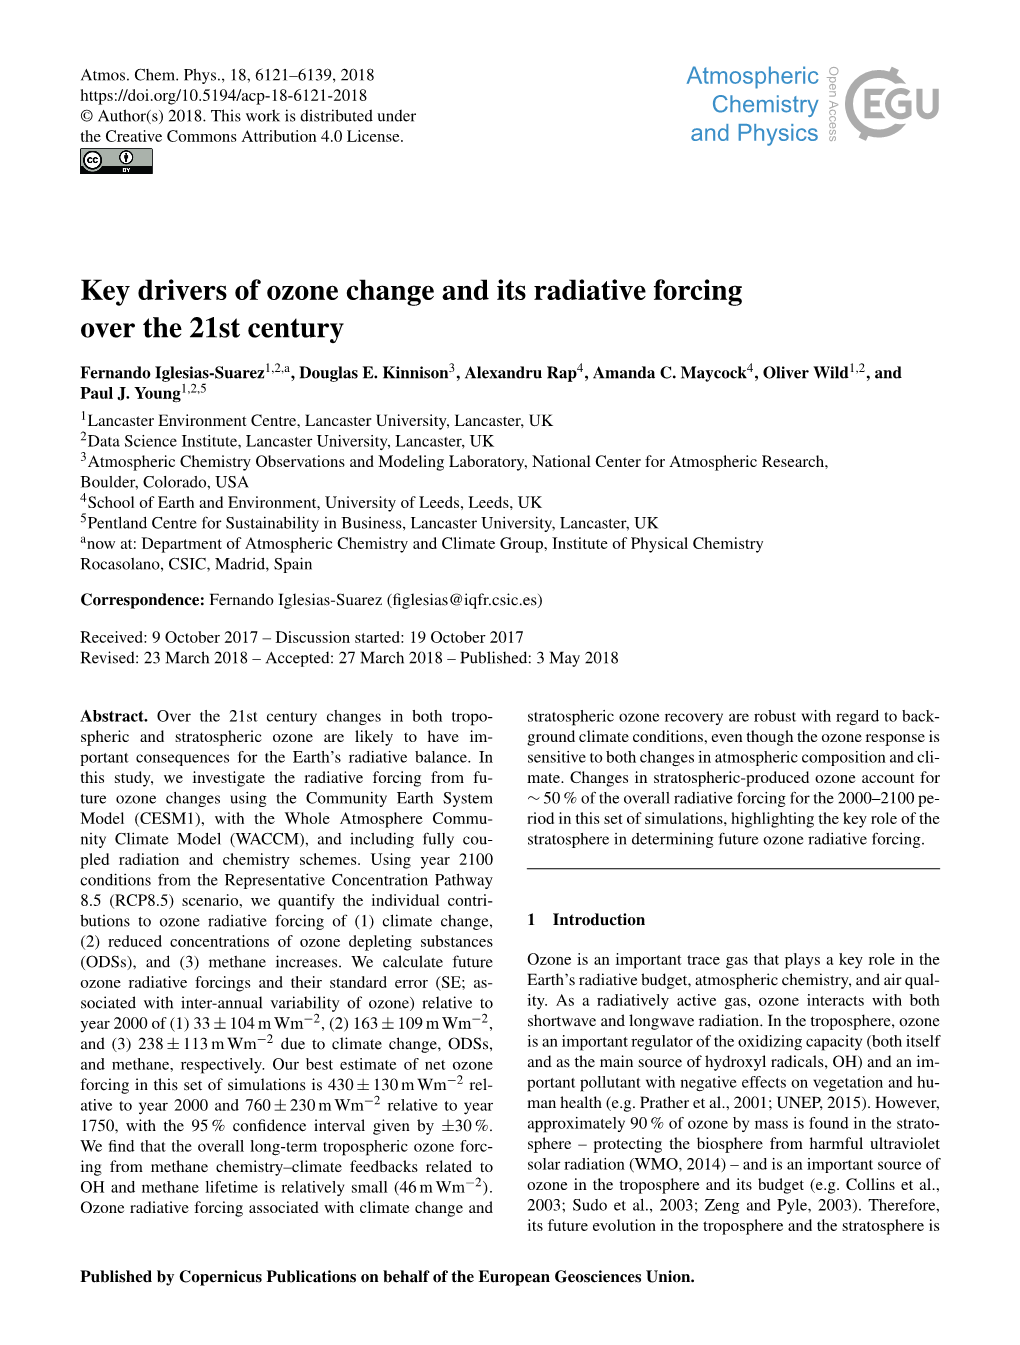 Key Drivers of Ozone Change and Its Radiative Forcing Over the 21St Century